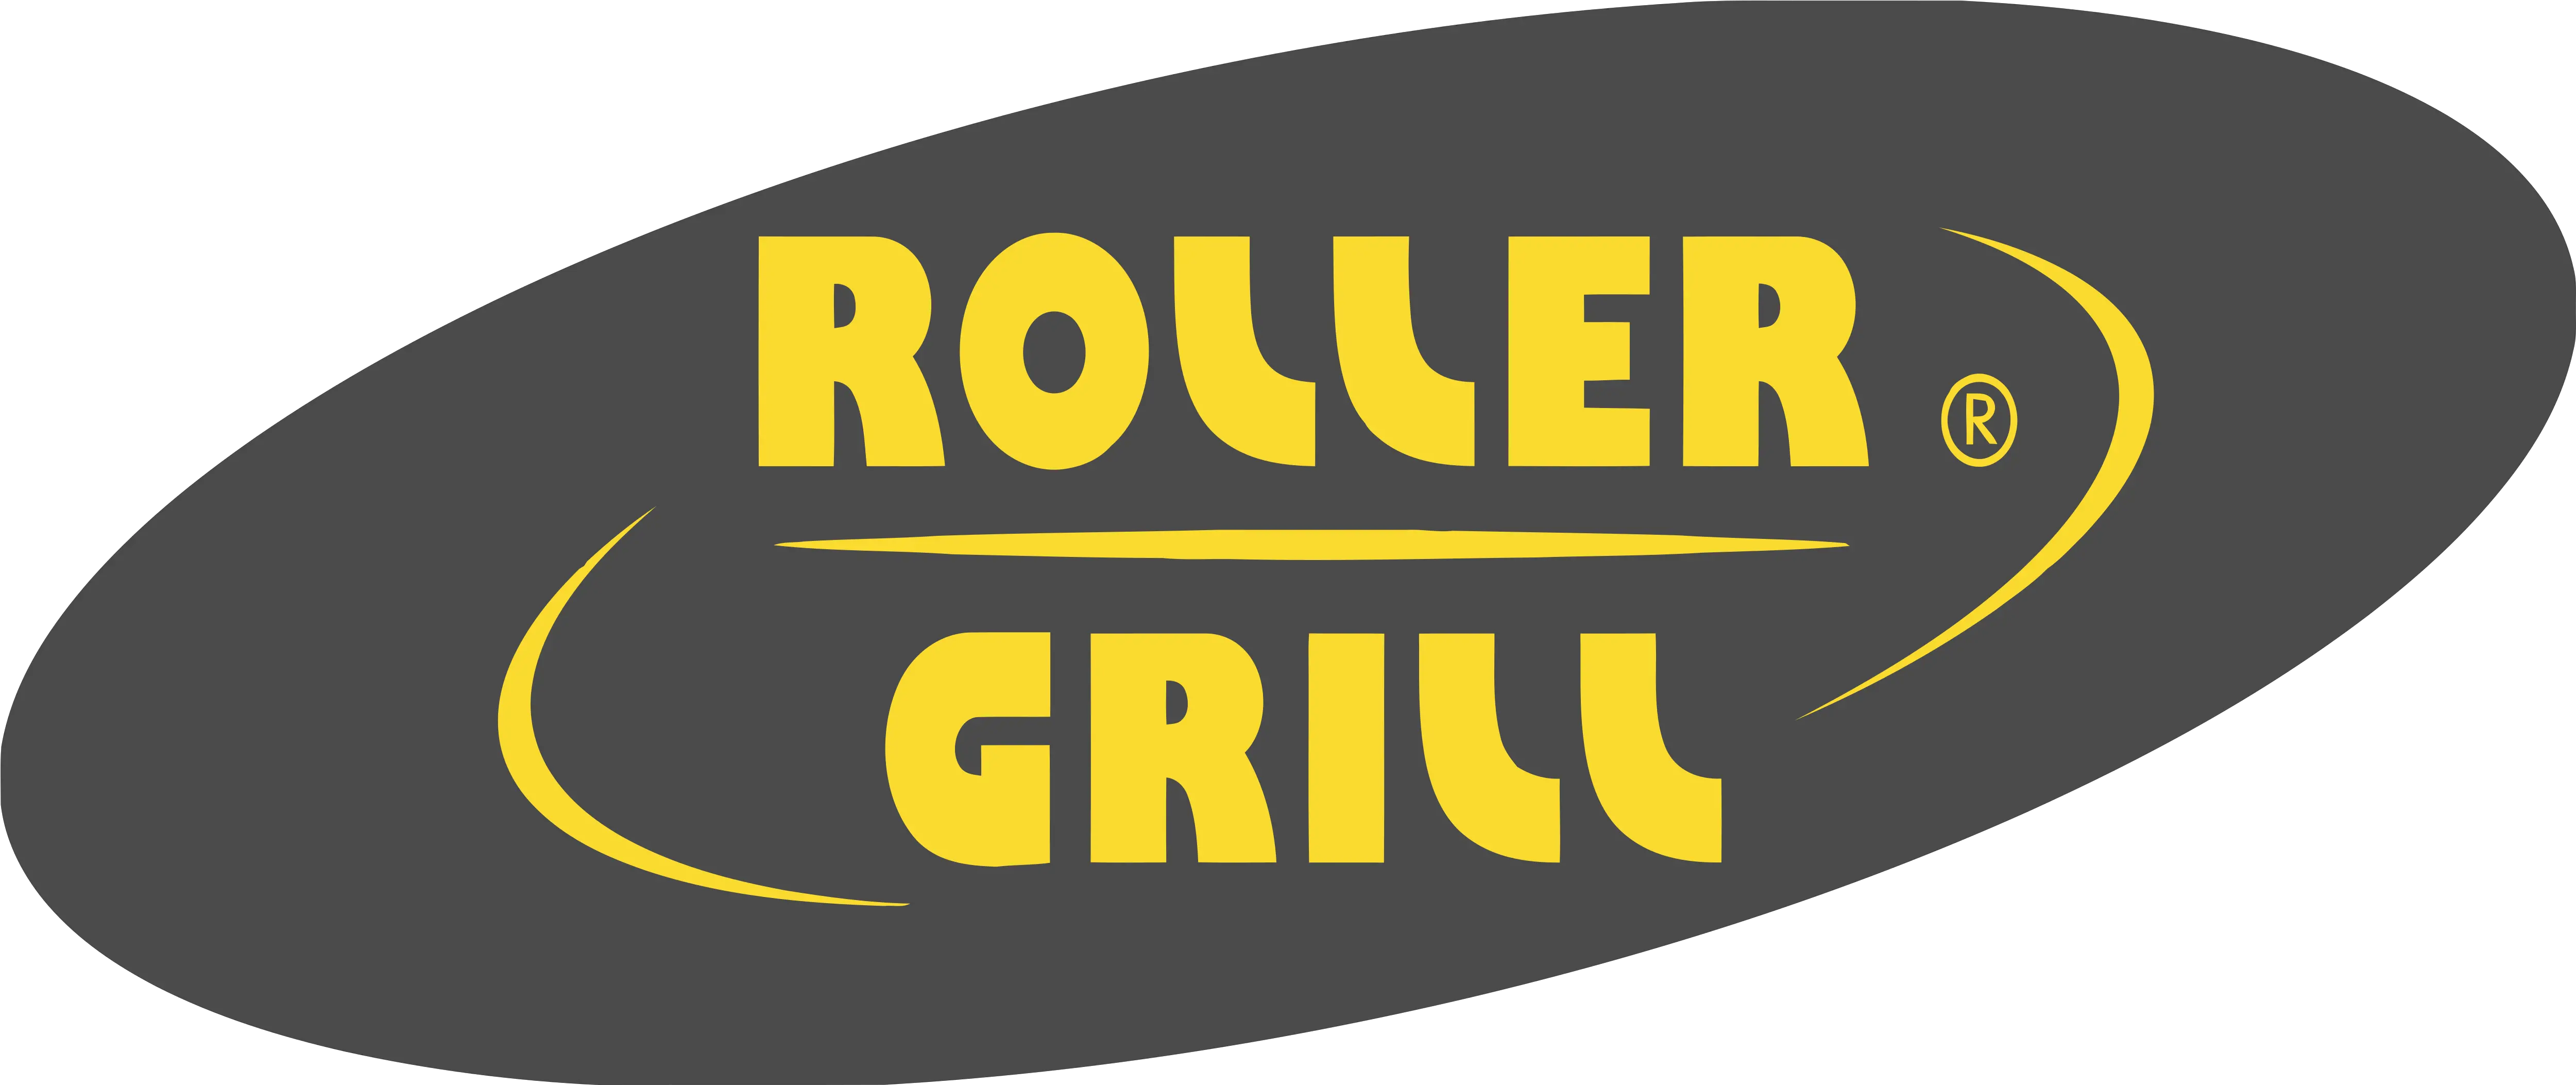 Roller Grill U2013 Logos Download Roller Grill Logo Png Grill Png